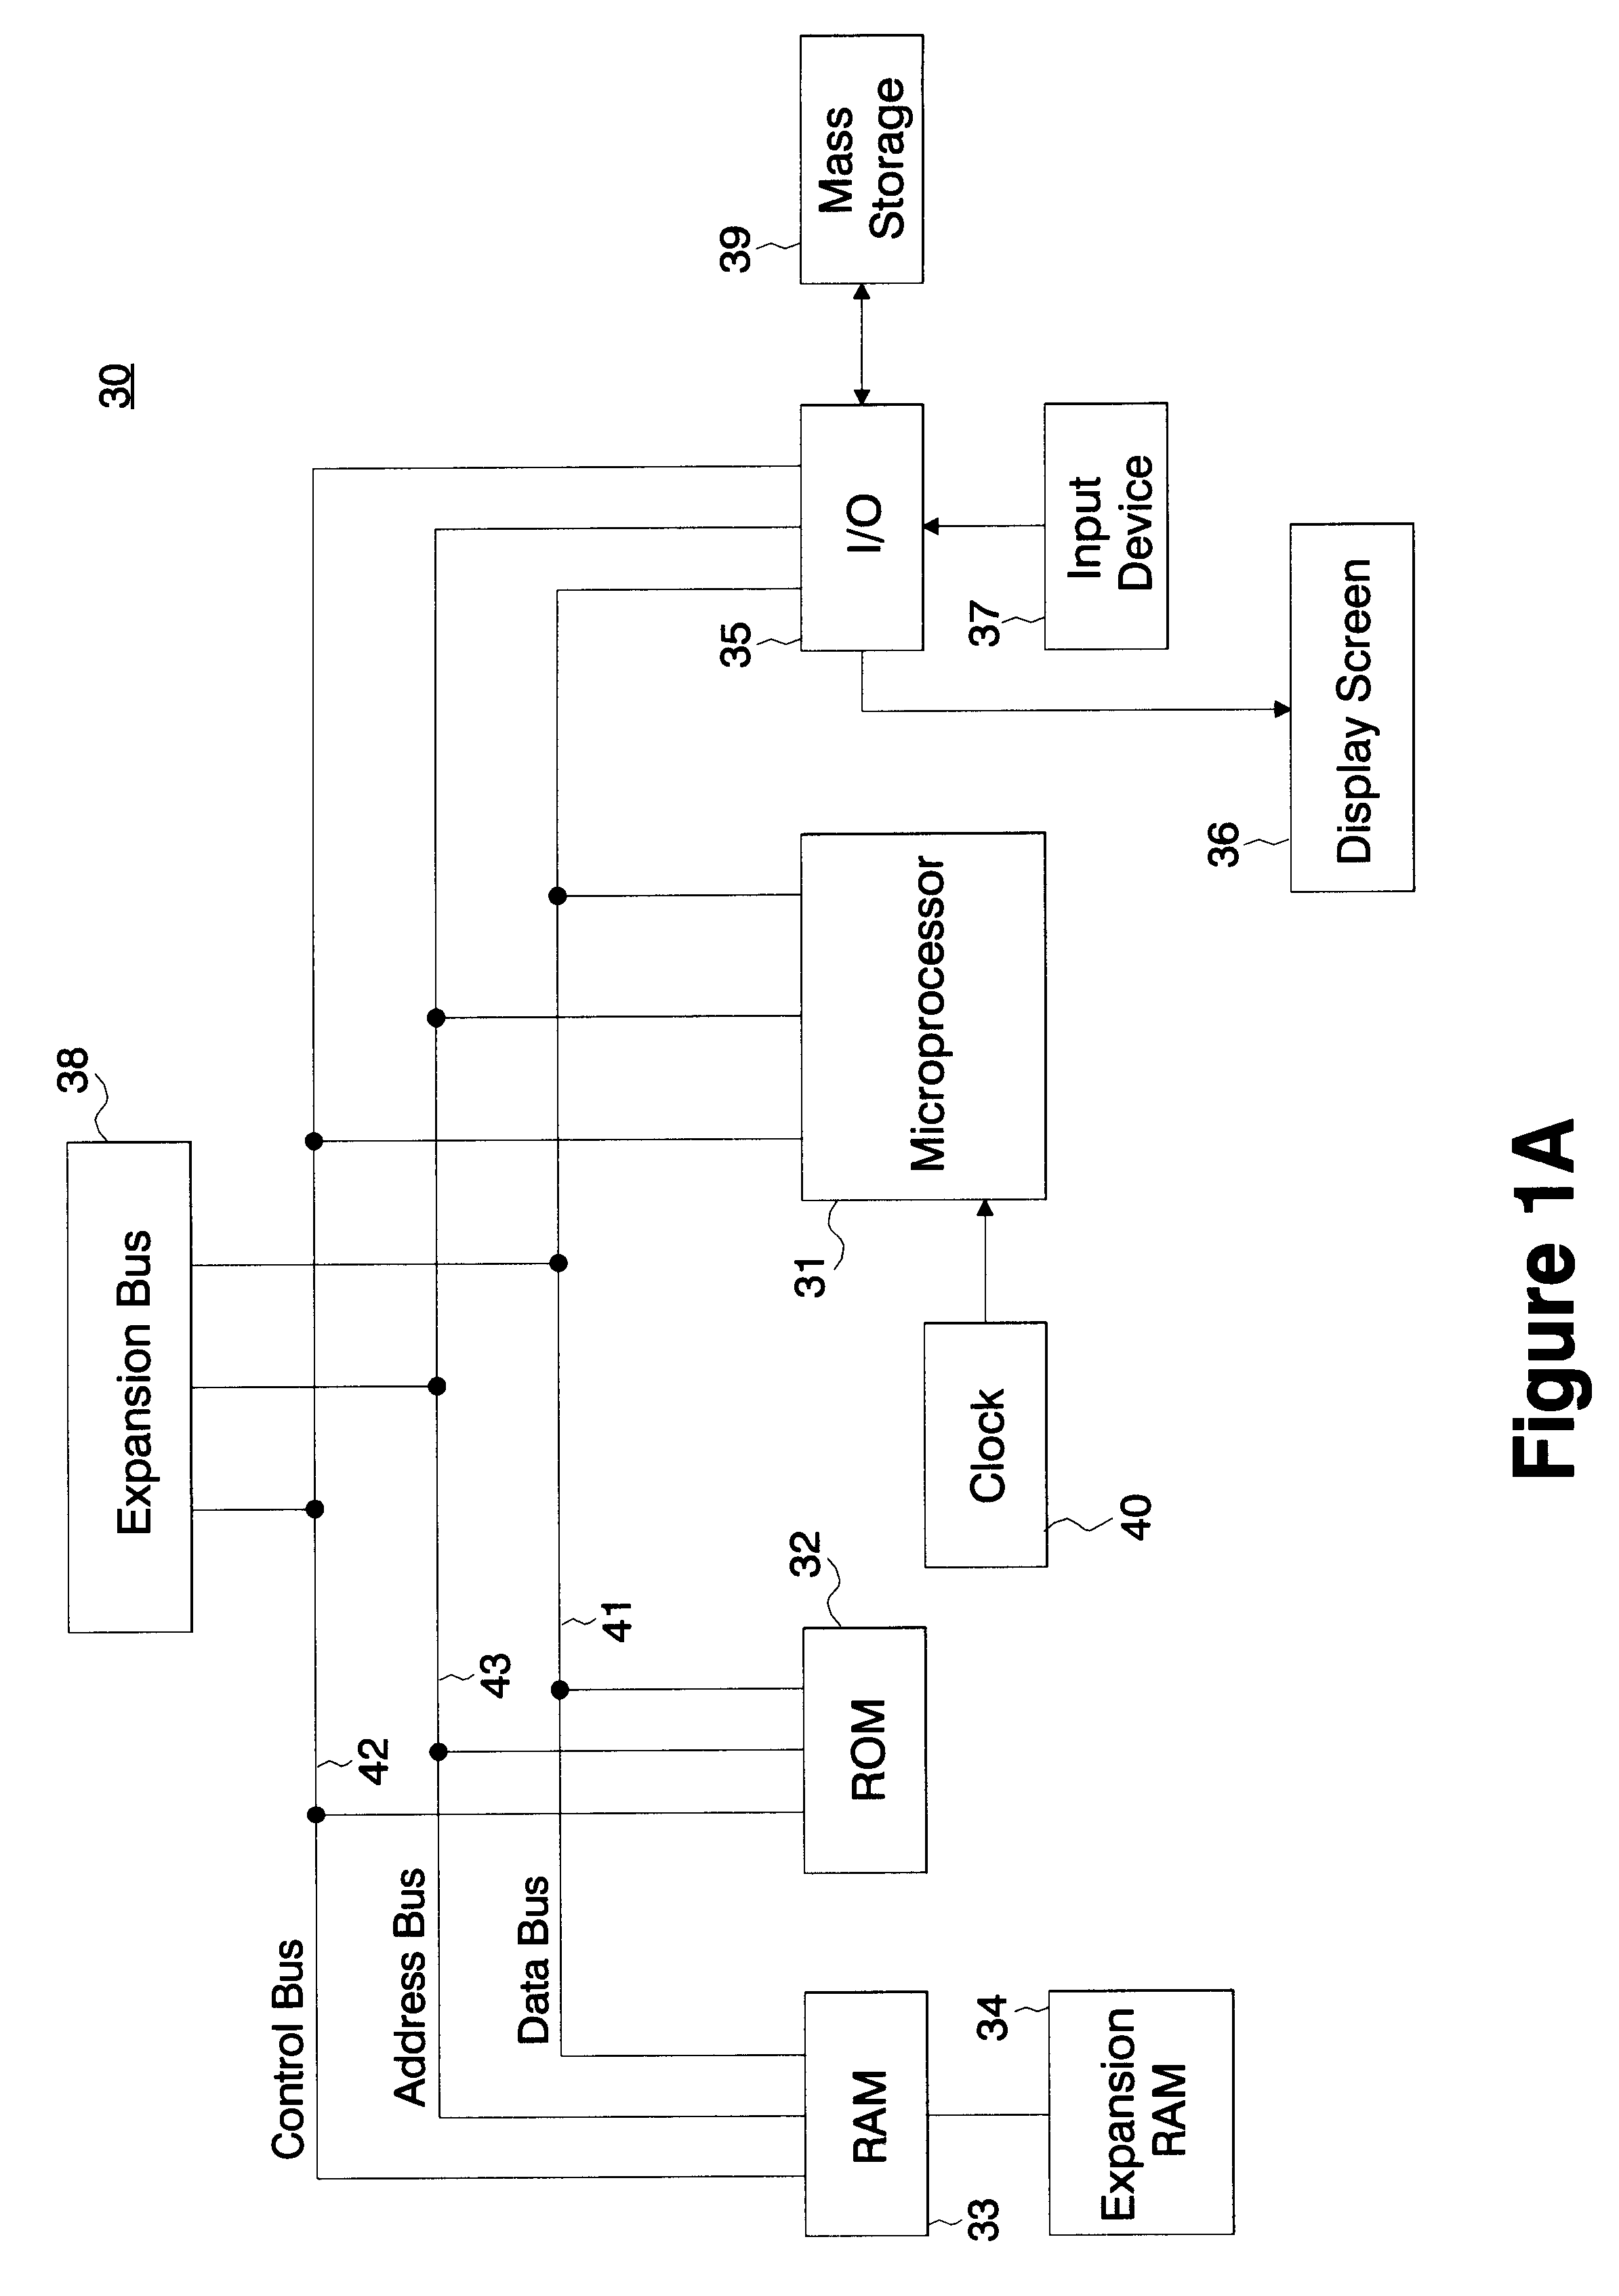 Method and apparatus for computer network management